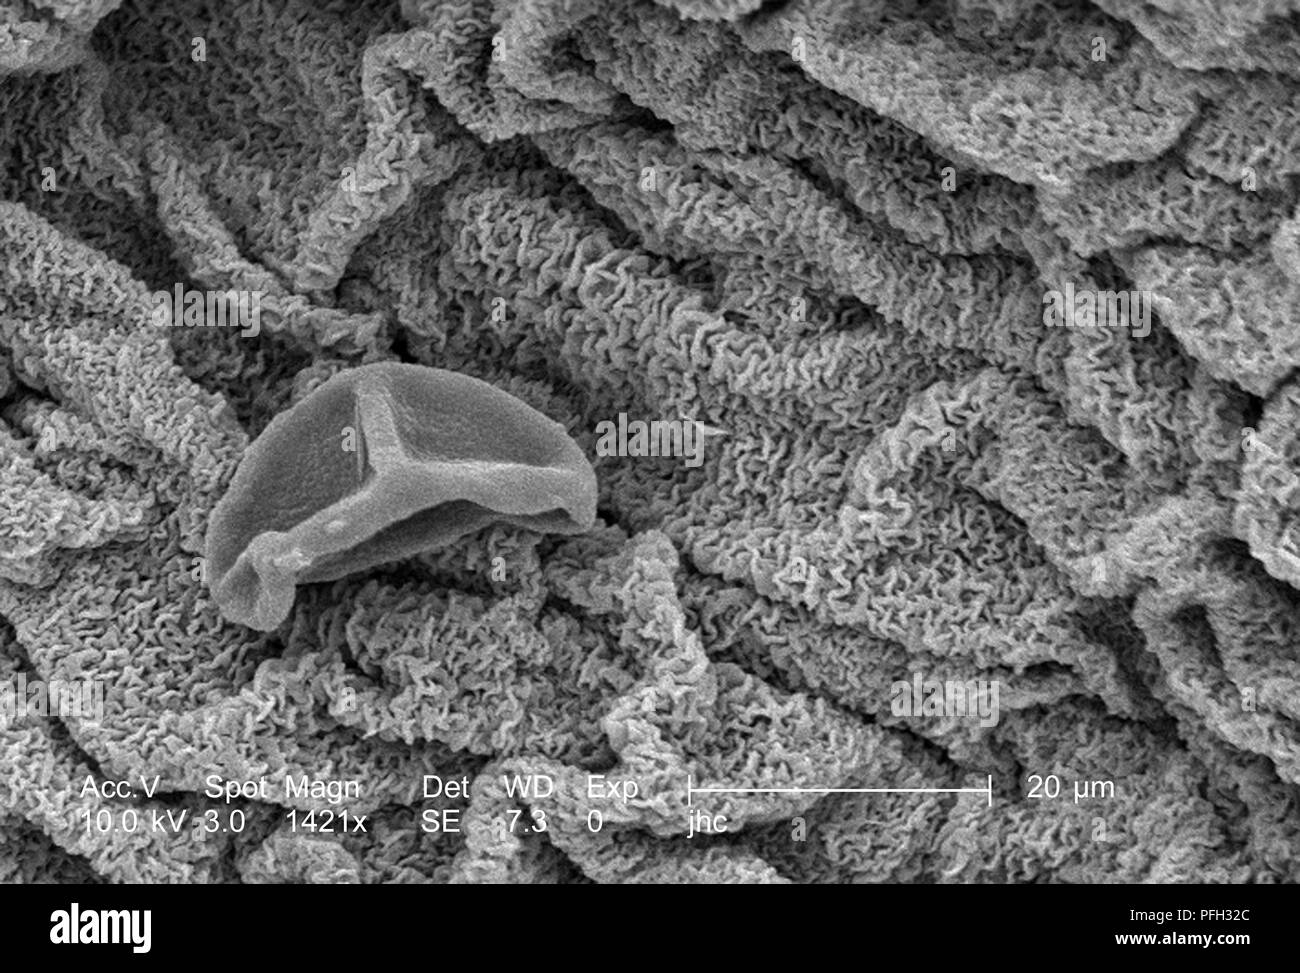 Morphologic ultrastructure on the petal of an unidentified species of 'spiderwort' flower (Tradescantia), revealed in the 1421x magnified scanning electron microscopic (SEM) image, 2006. Image courtesy Centers for Disease Control (CDC) / Janice Haney Carr, Betsy Crane. () Stock Photo